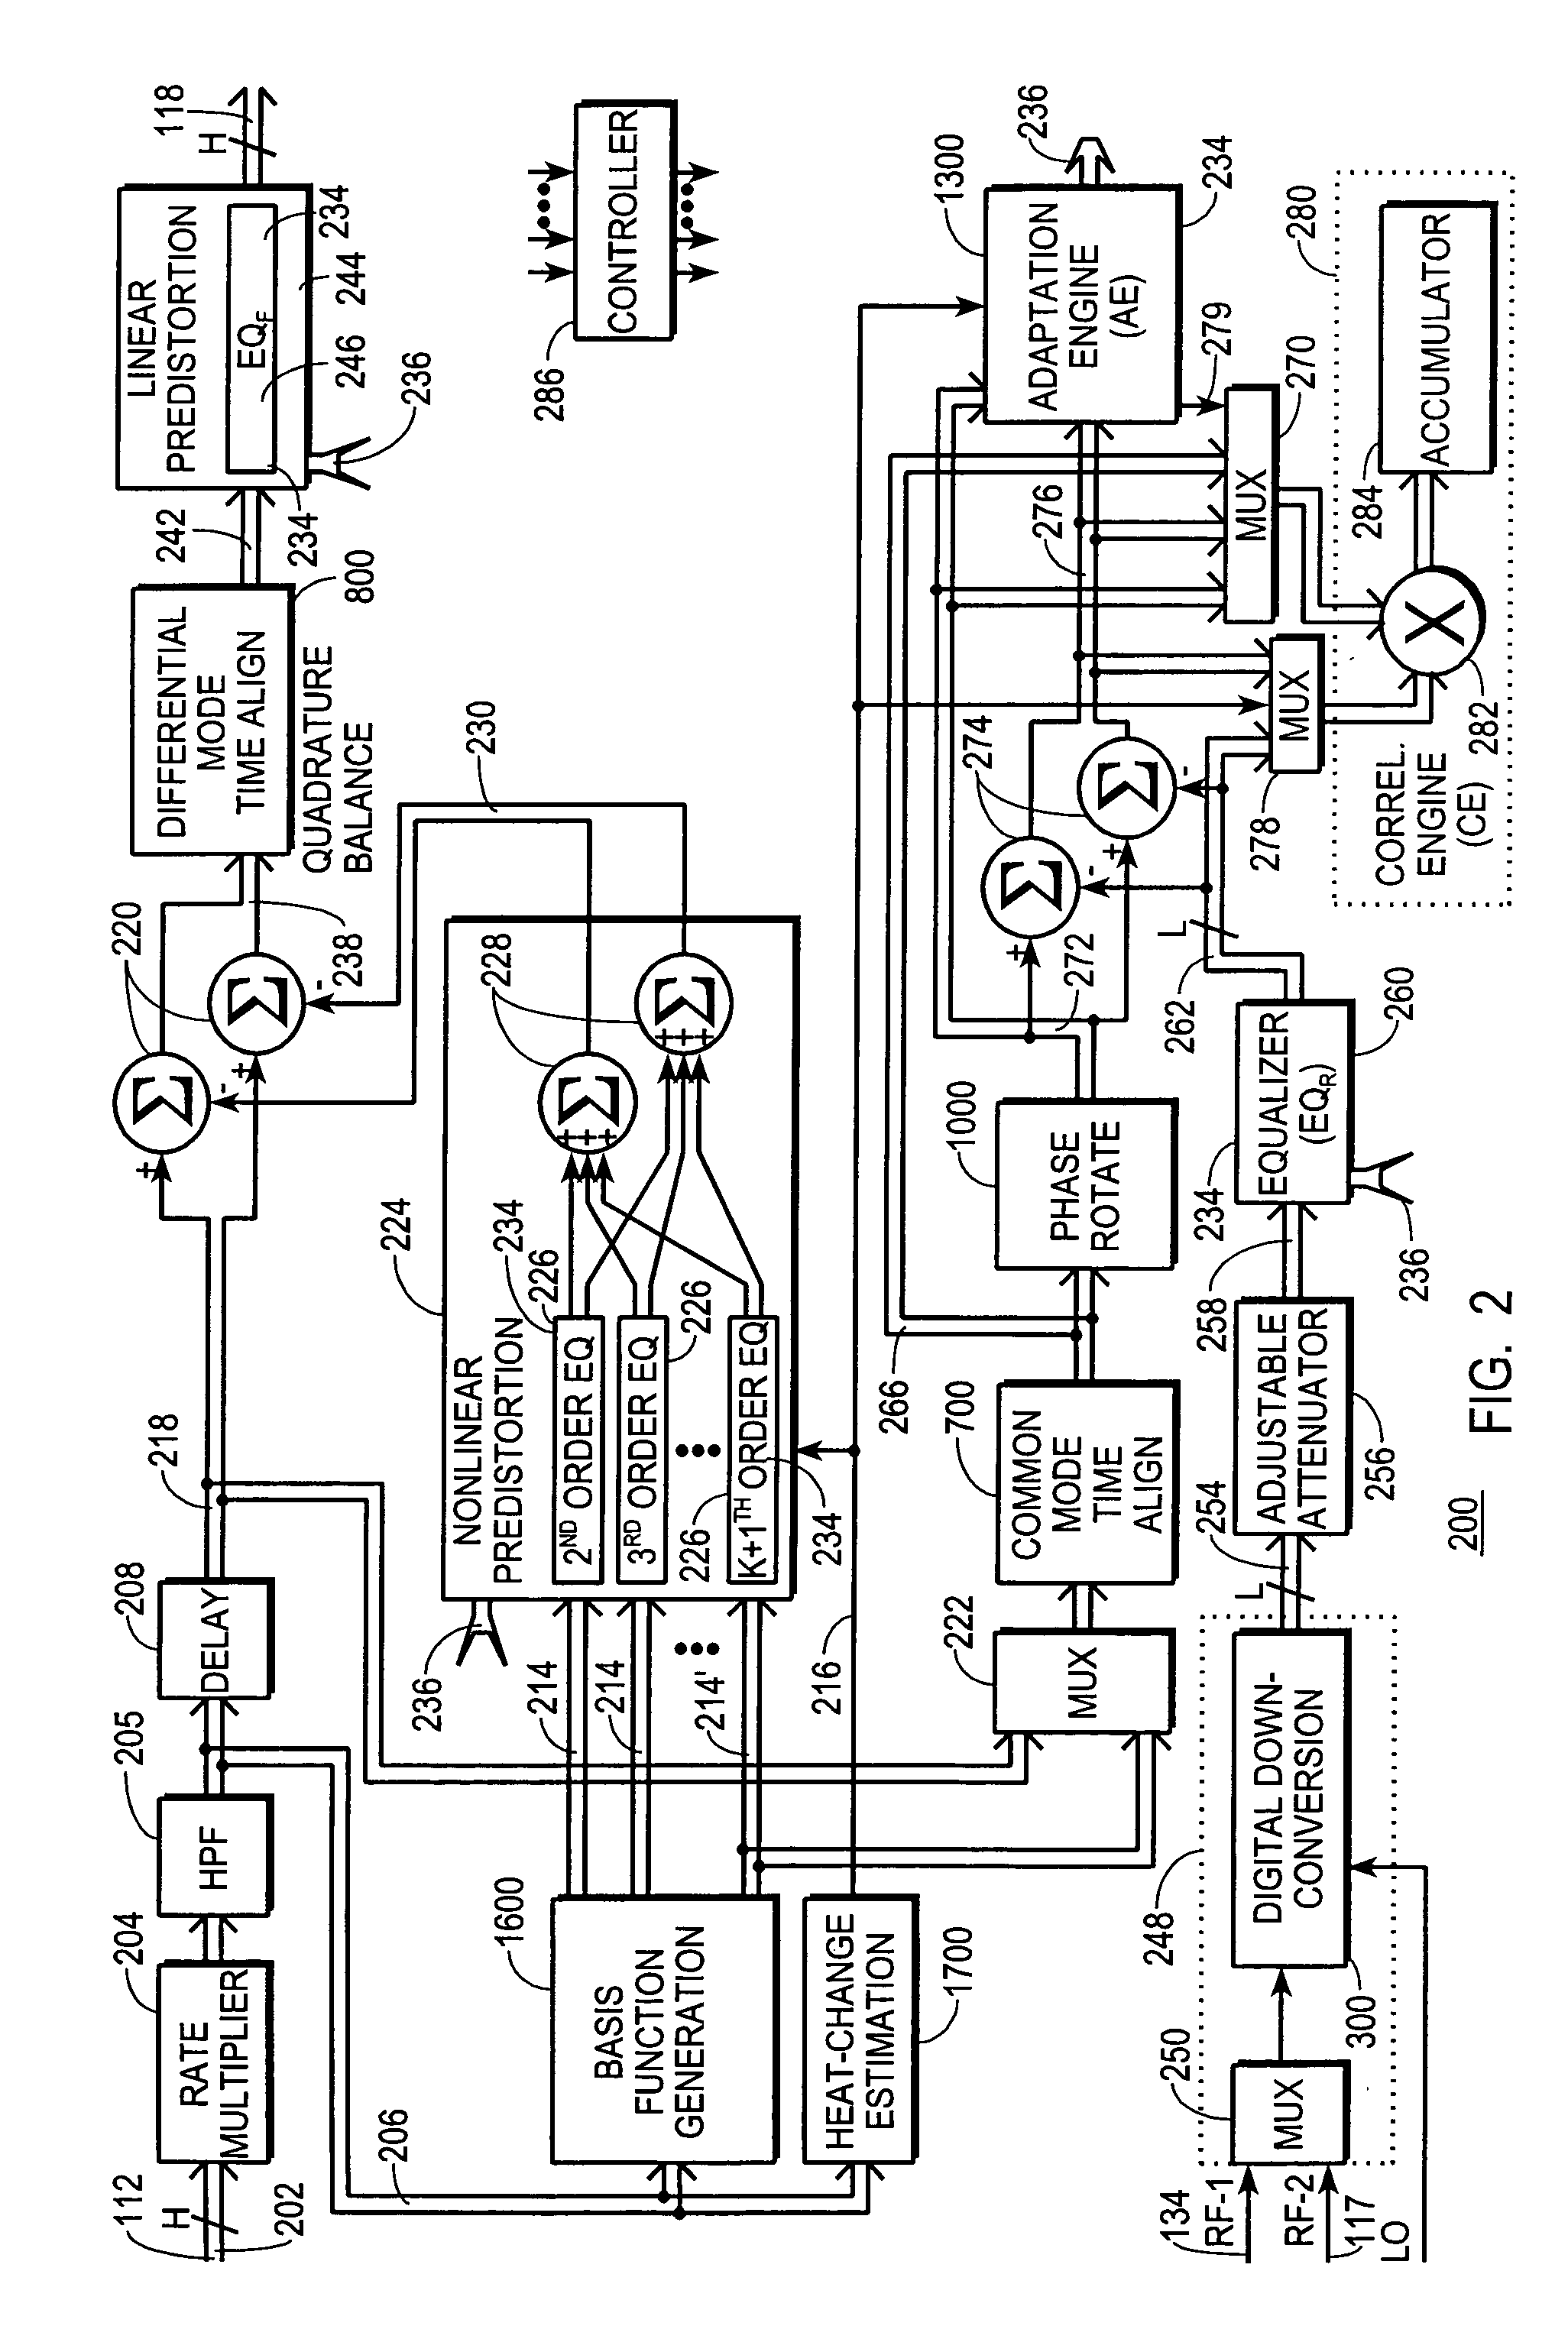 Transmitter predistortion circuit and method therefor